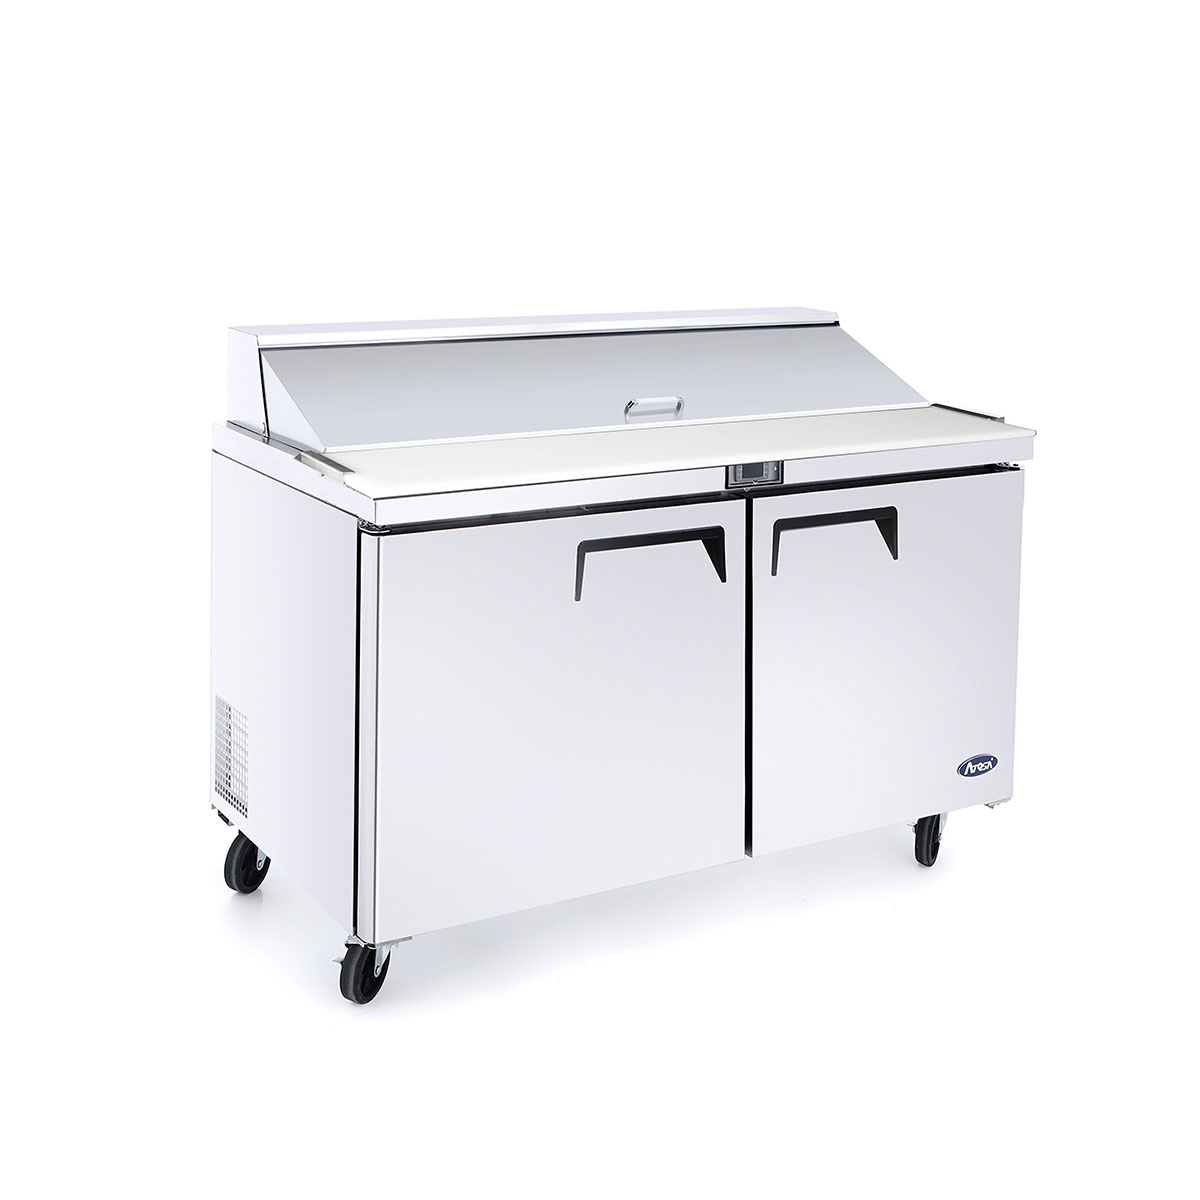 Atosa - MSF8302GR - 48″ Refrigerated Standard Top Sandwich Prep. Table